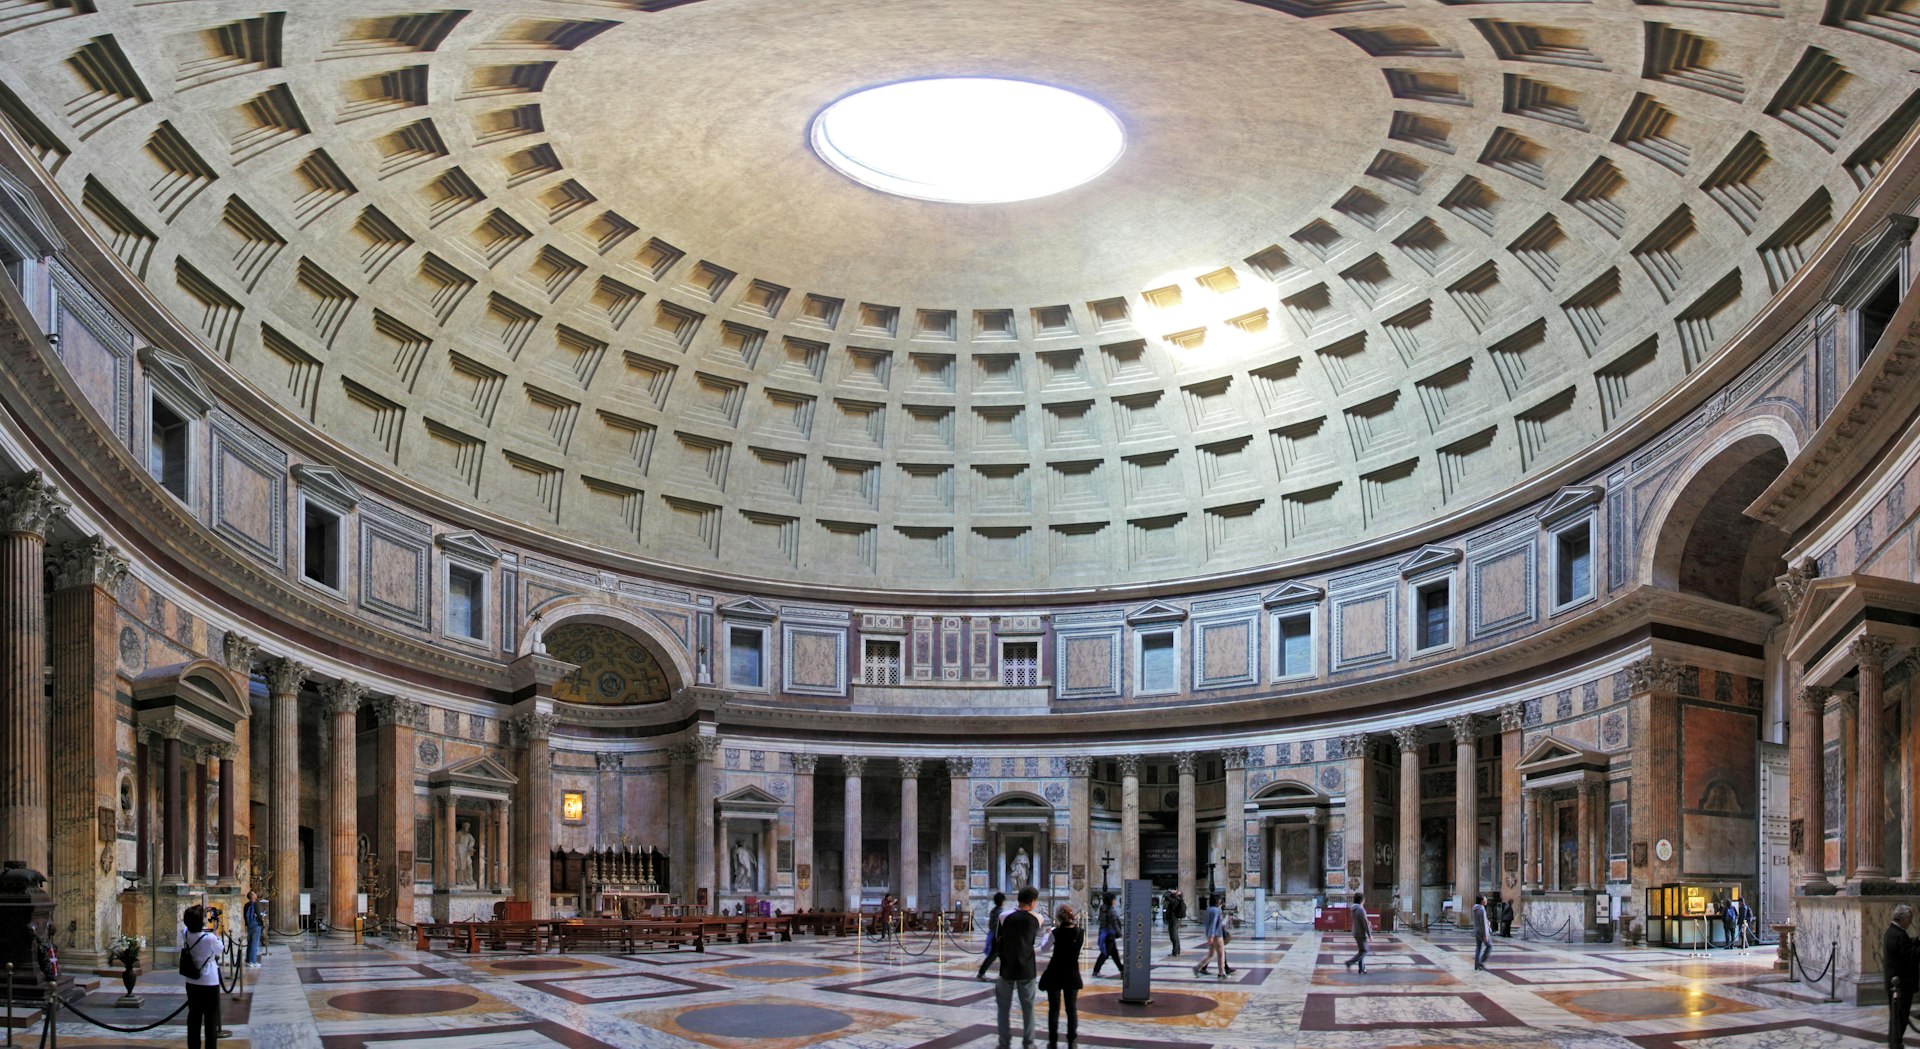 A huge domed roof with a large central hole that light shines through